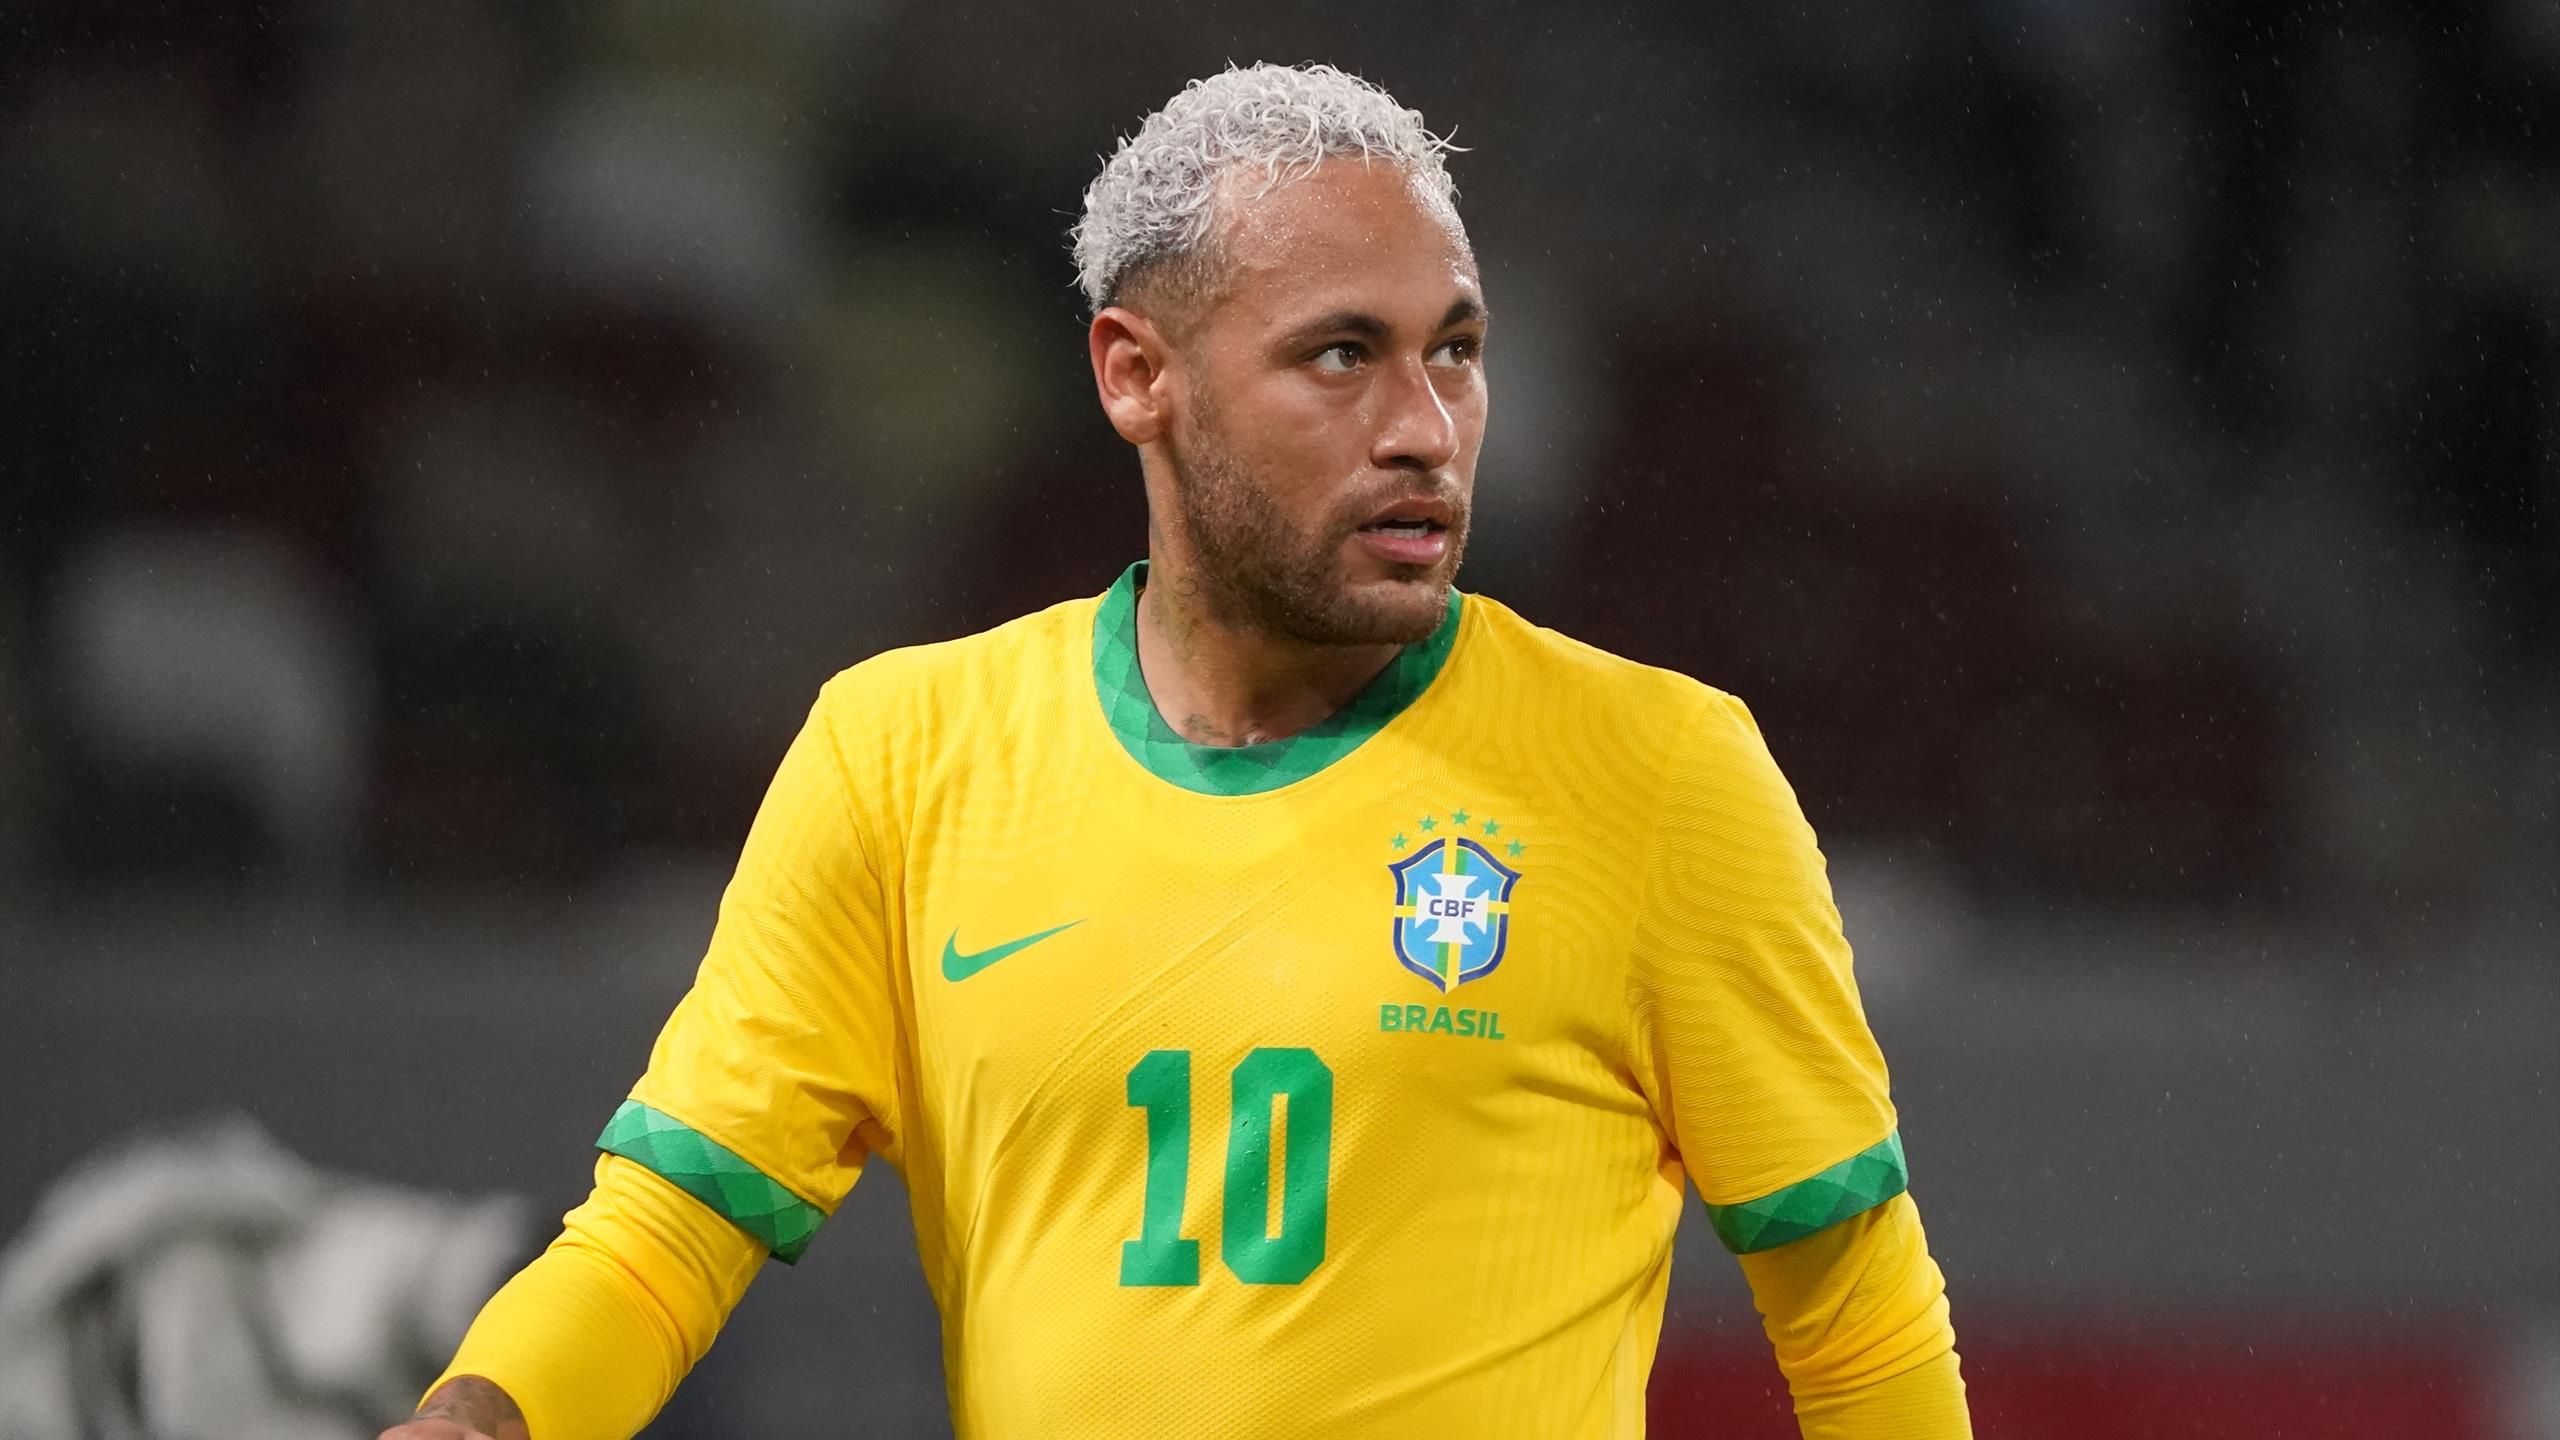 Neymar set to leave the national team after the 2022 World Cup in Qatar amid reports of Brazil retirement